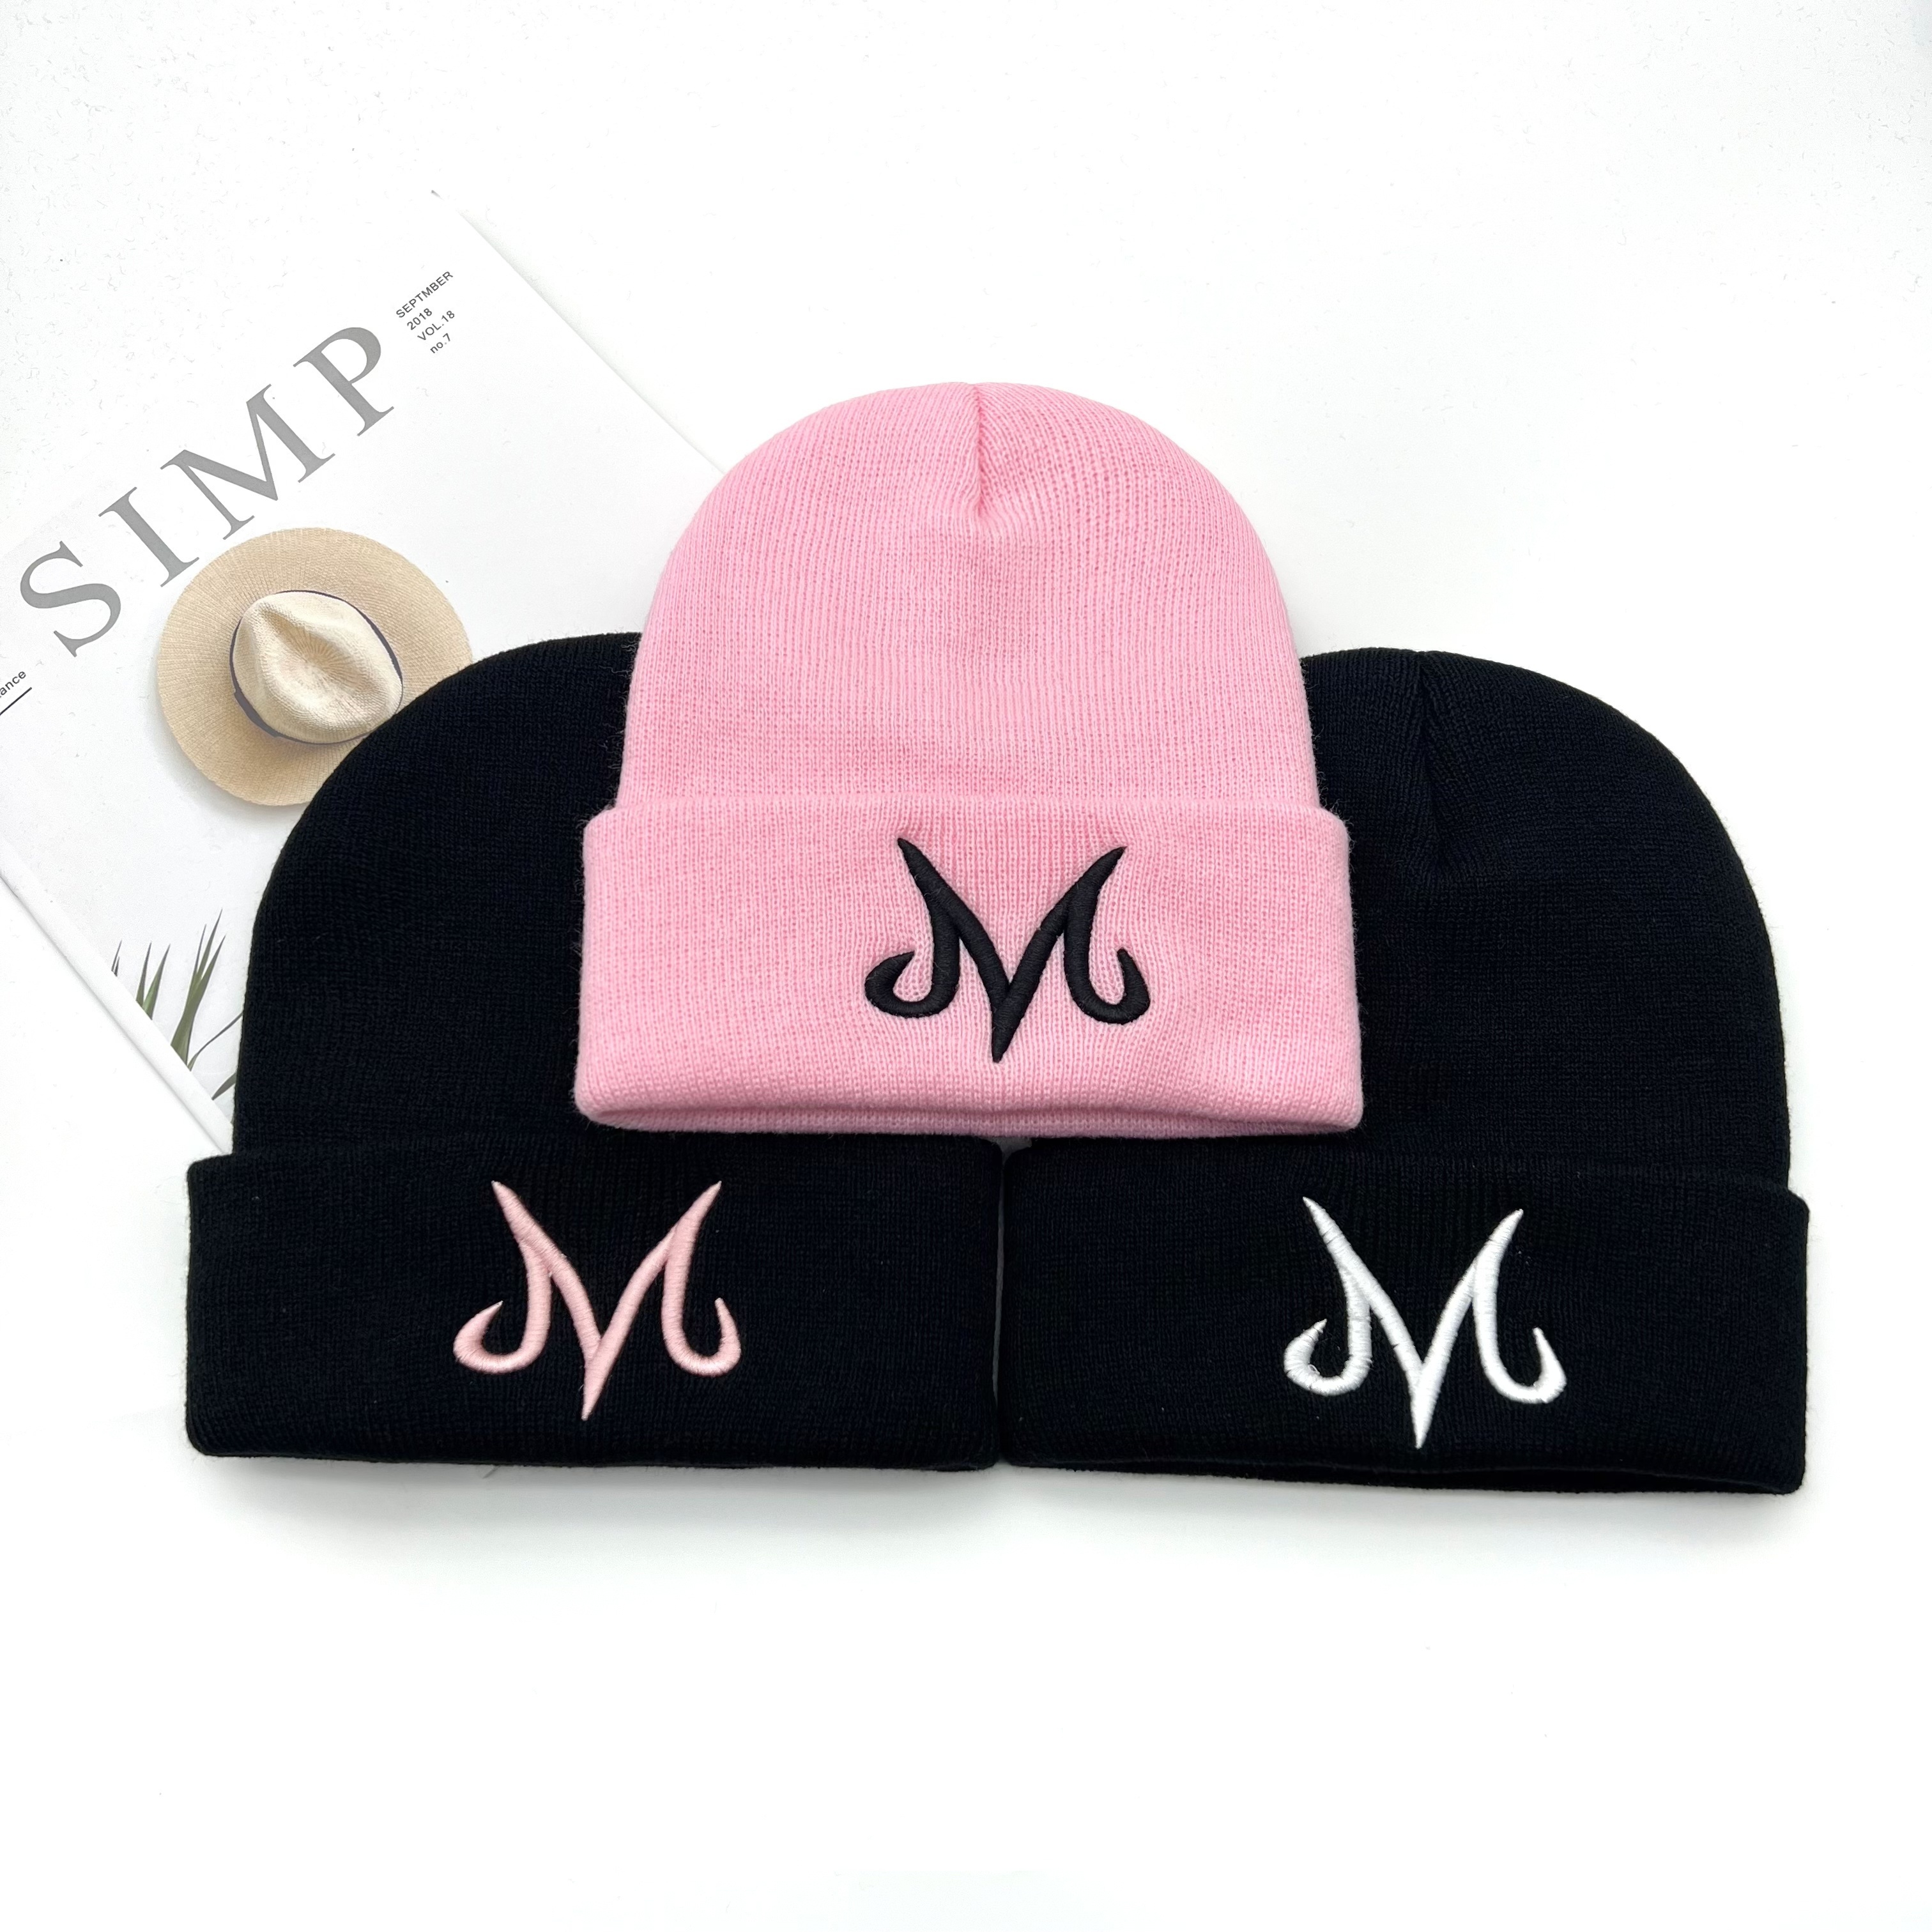 

M Letter Embroidered Knitted Hat, For Men Windproof Ear Protection Beanie, Outdoor Warm Fashion Beanie